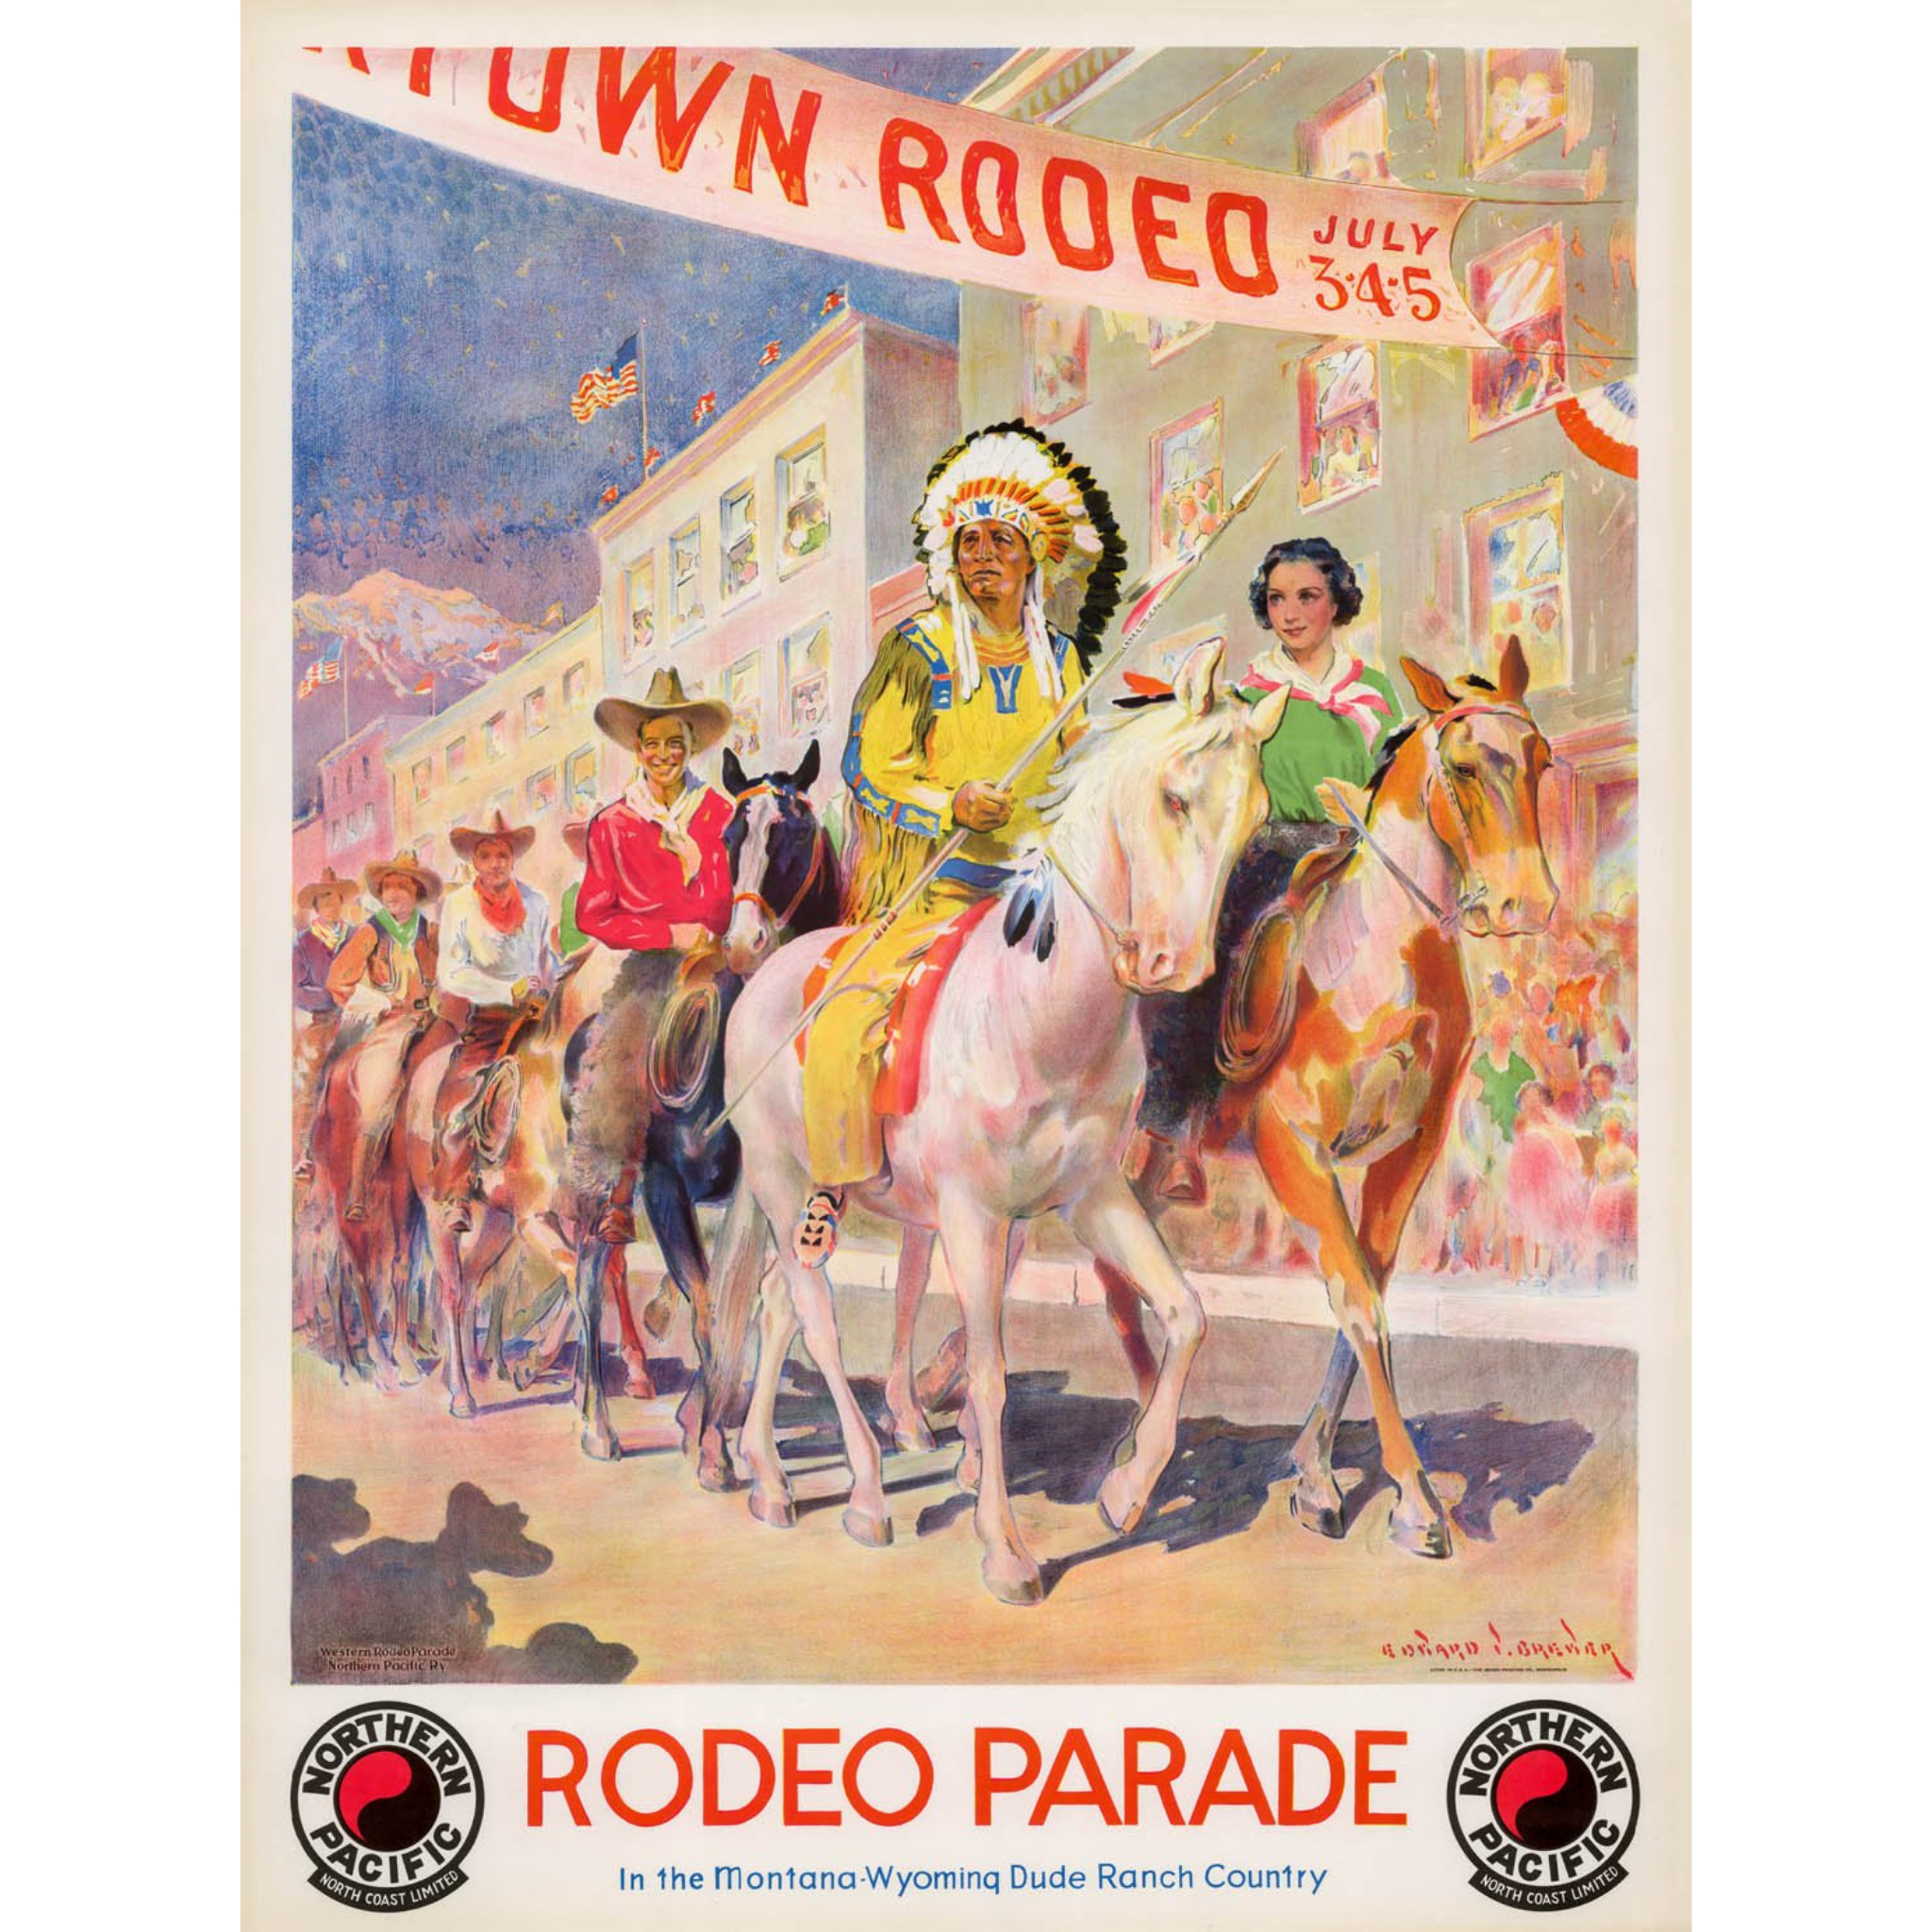 Rodeo Parade - Livingston (NPRR) - ca. 1935 Edward Brewer Lithograph